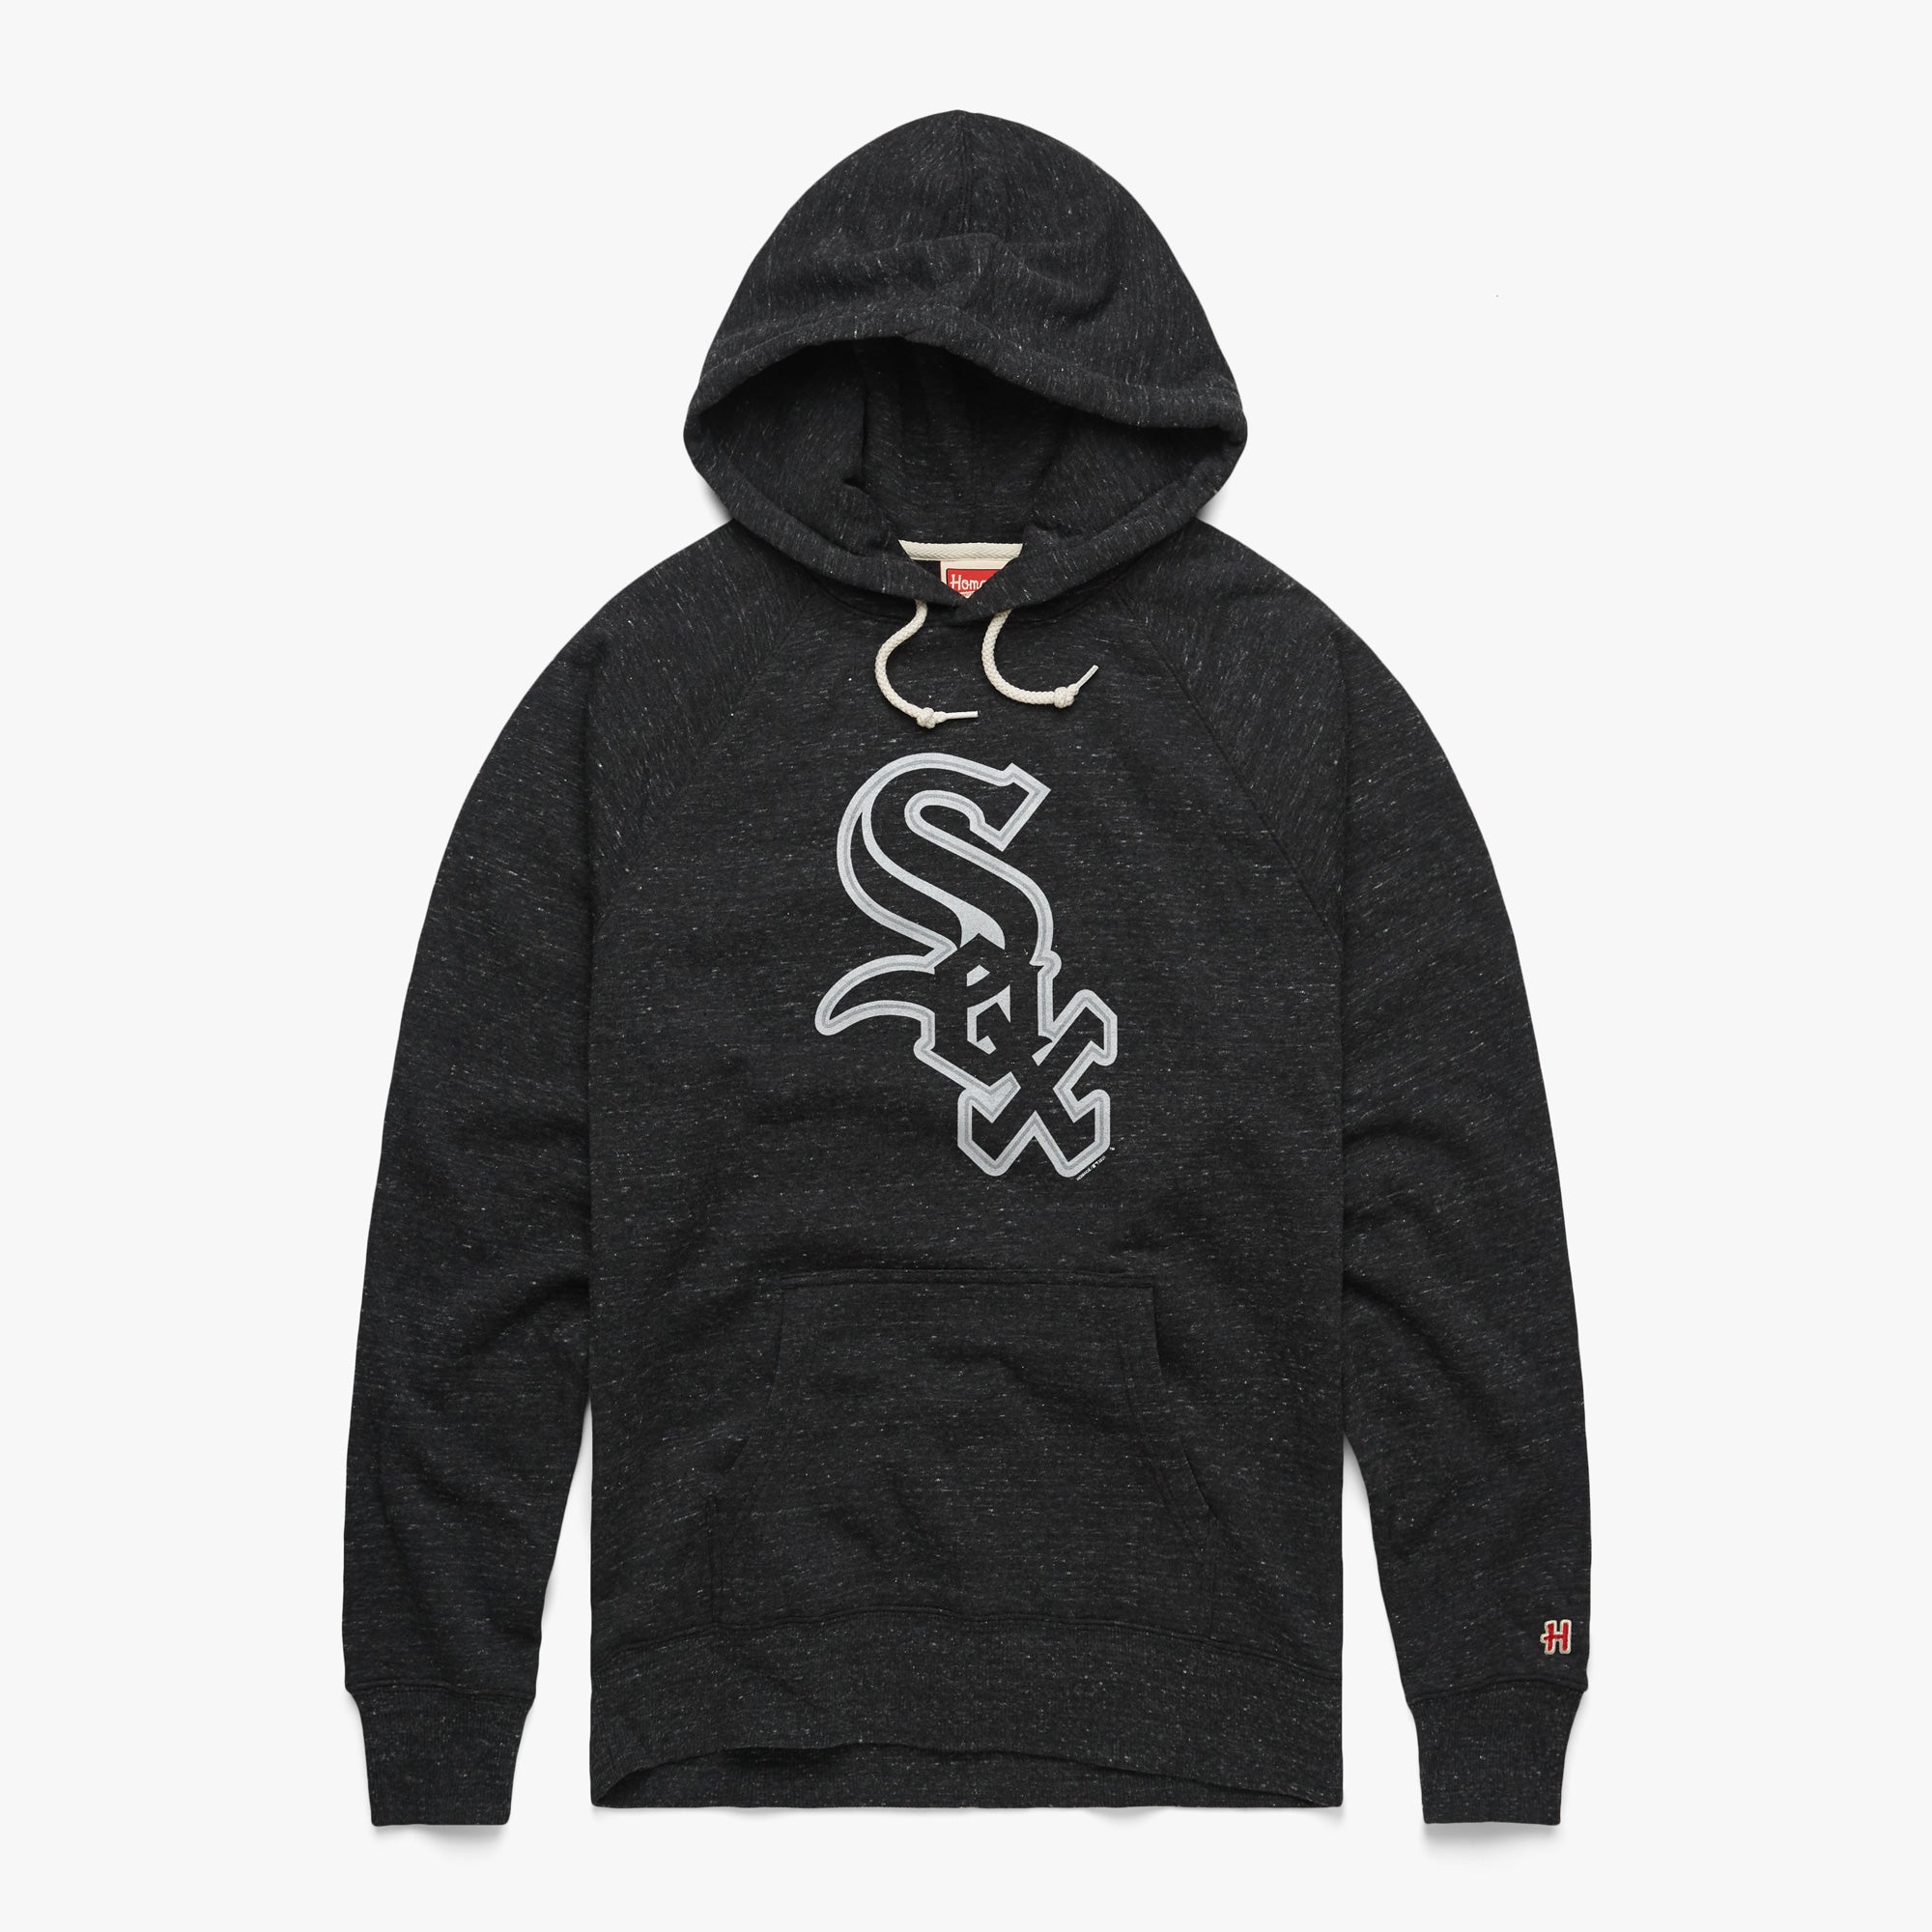 Chicago White Sox '91 Hoodie from Homage. | Charcoal | Vintage Apparel from Homage.